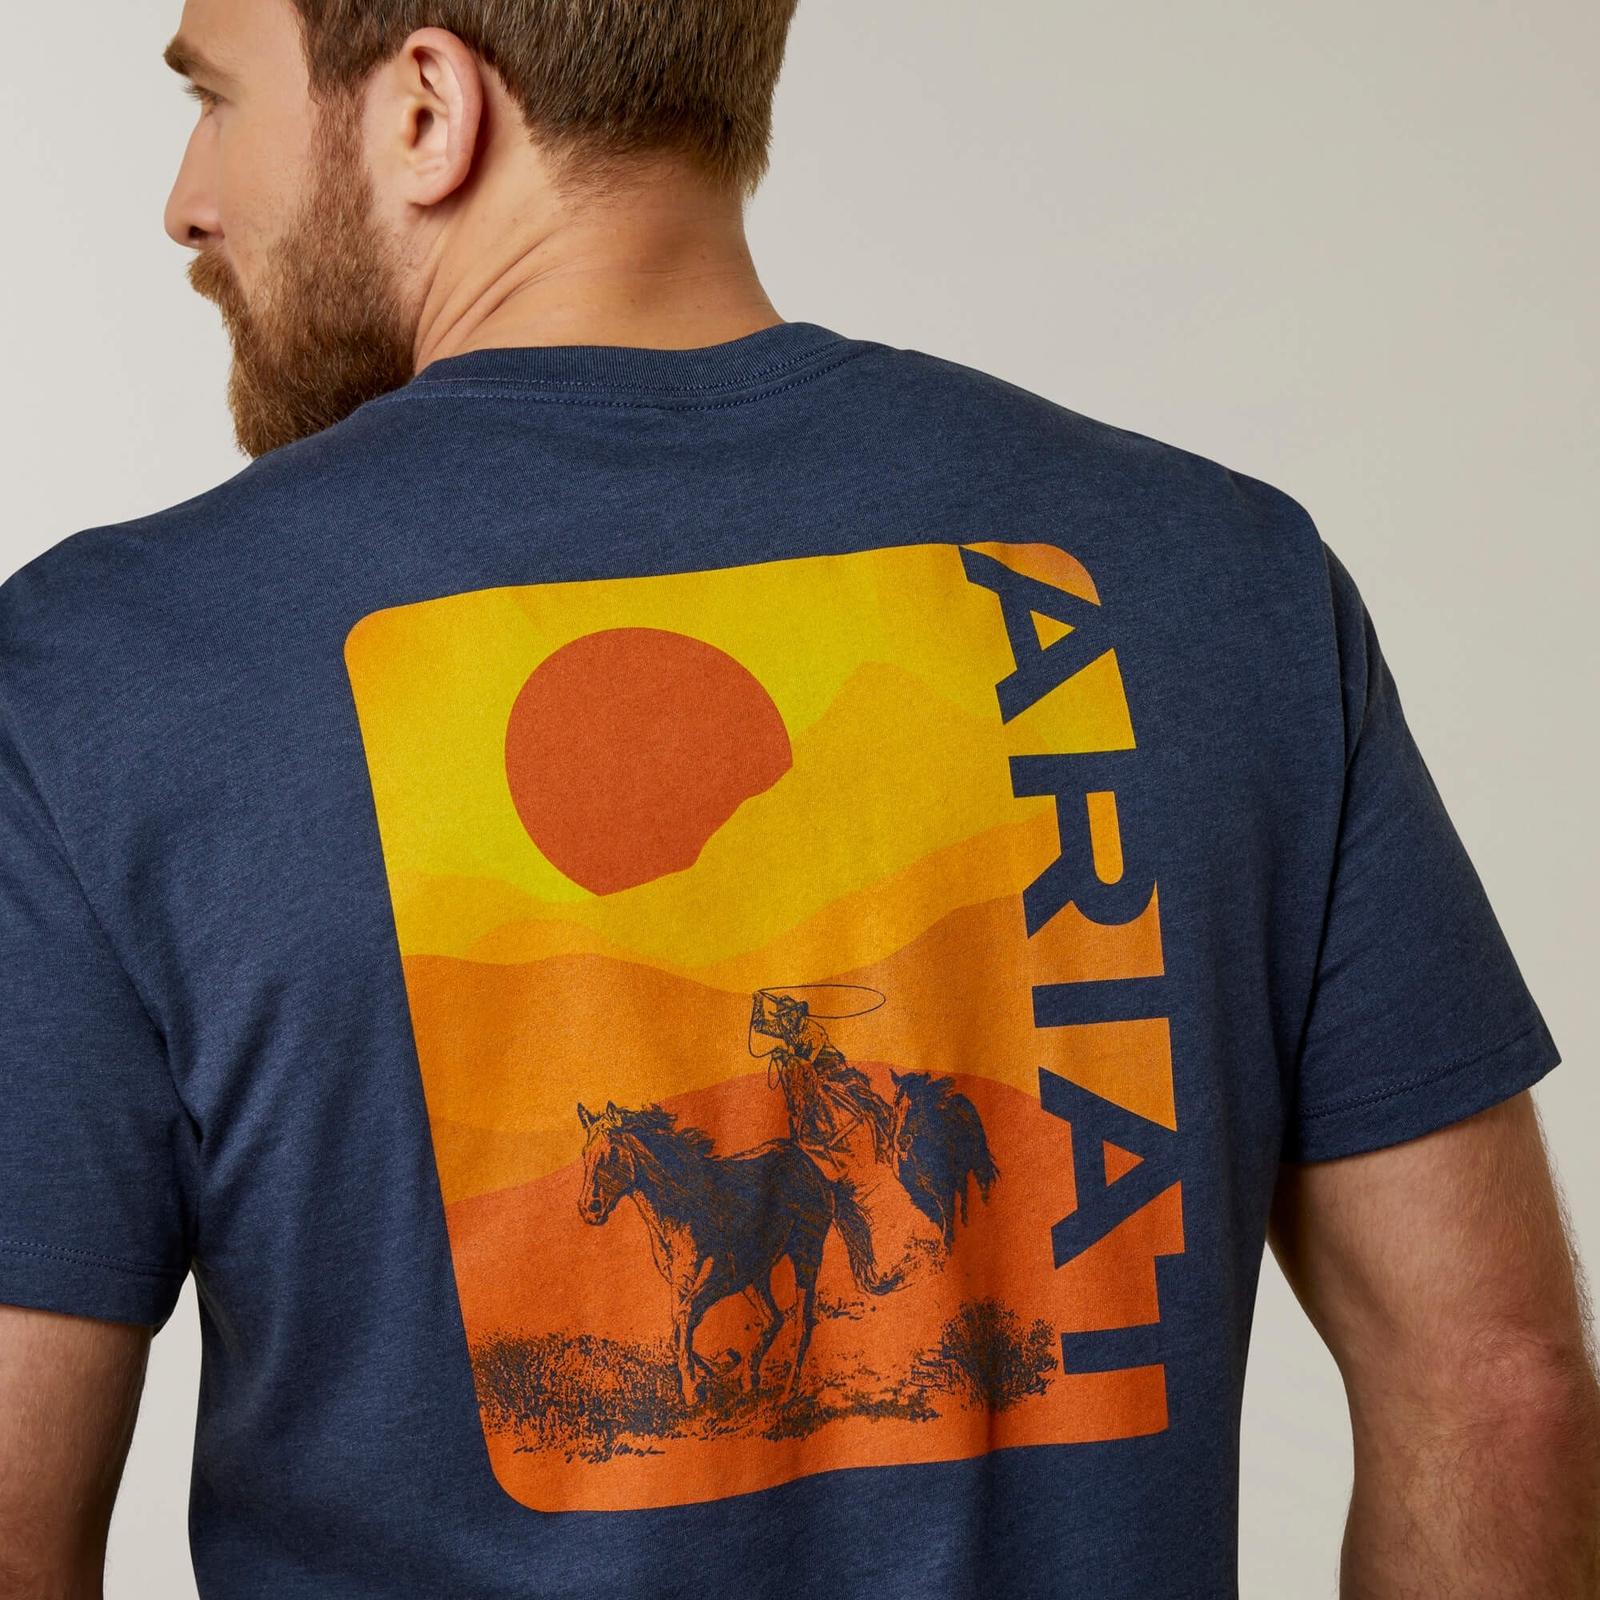 Ariat Mustang Fever T-Shirt back close up graphic